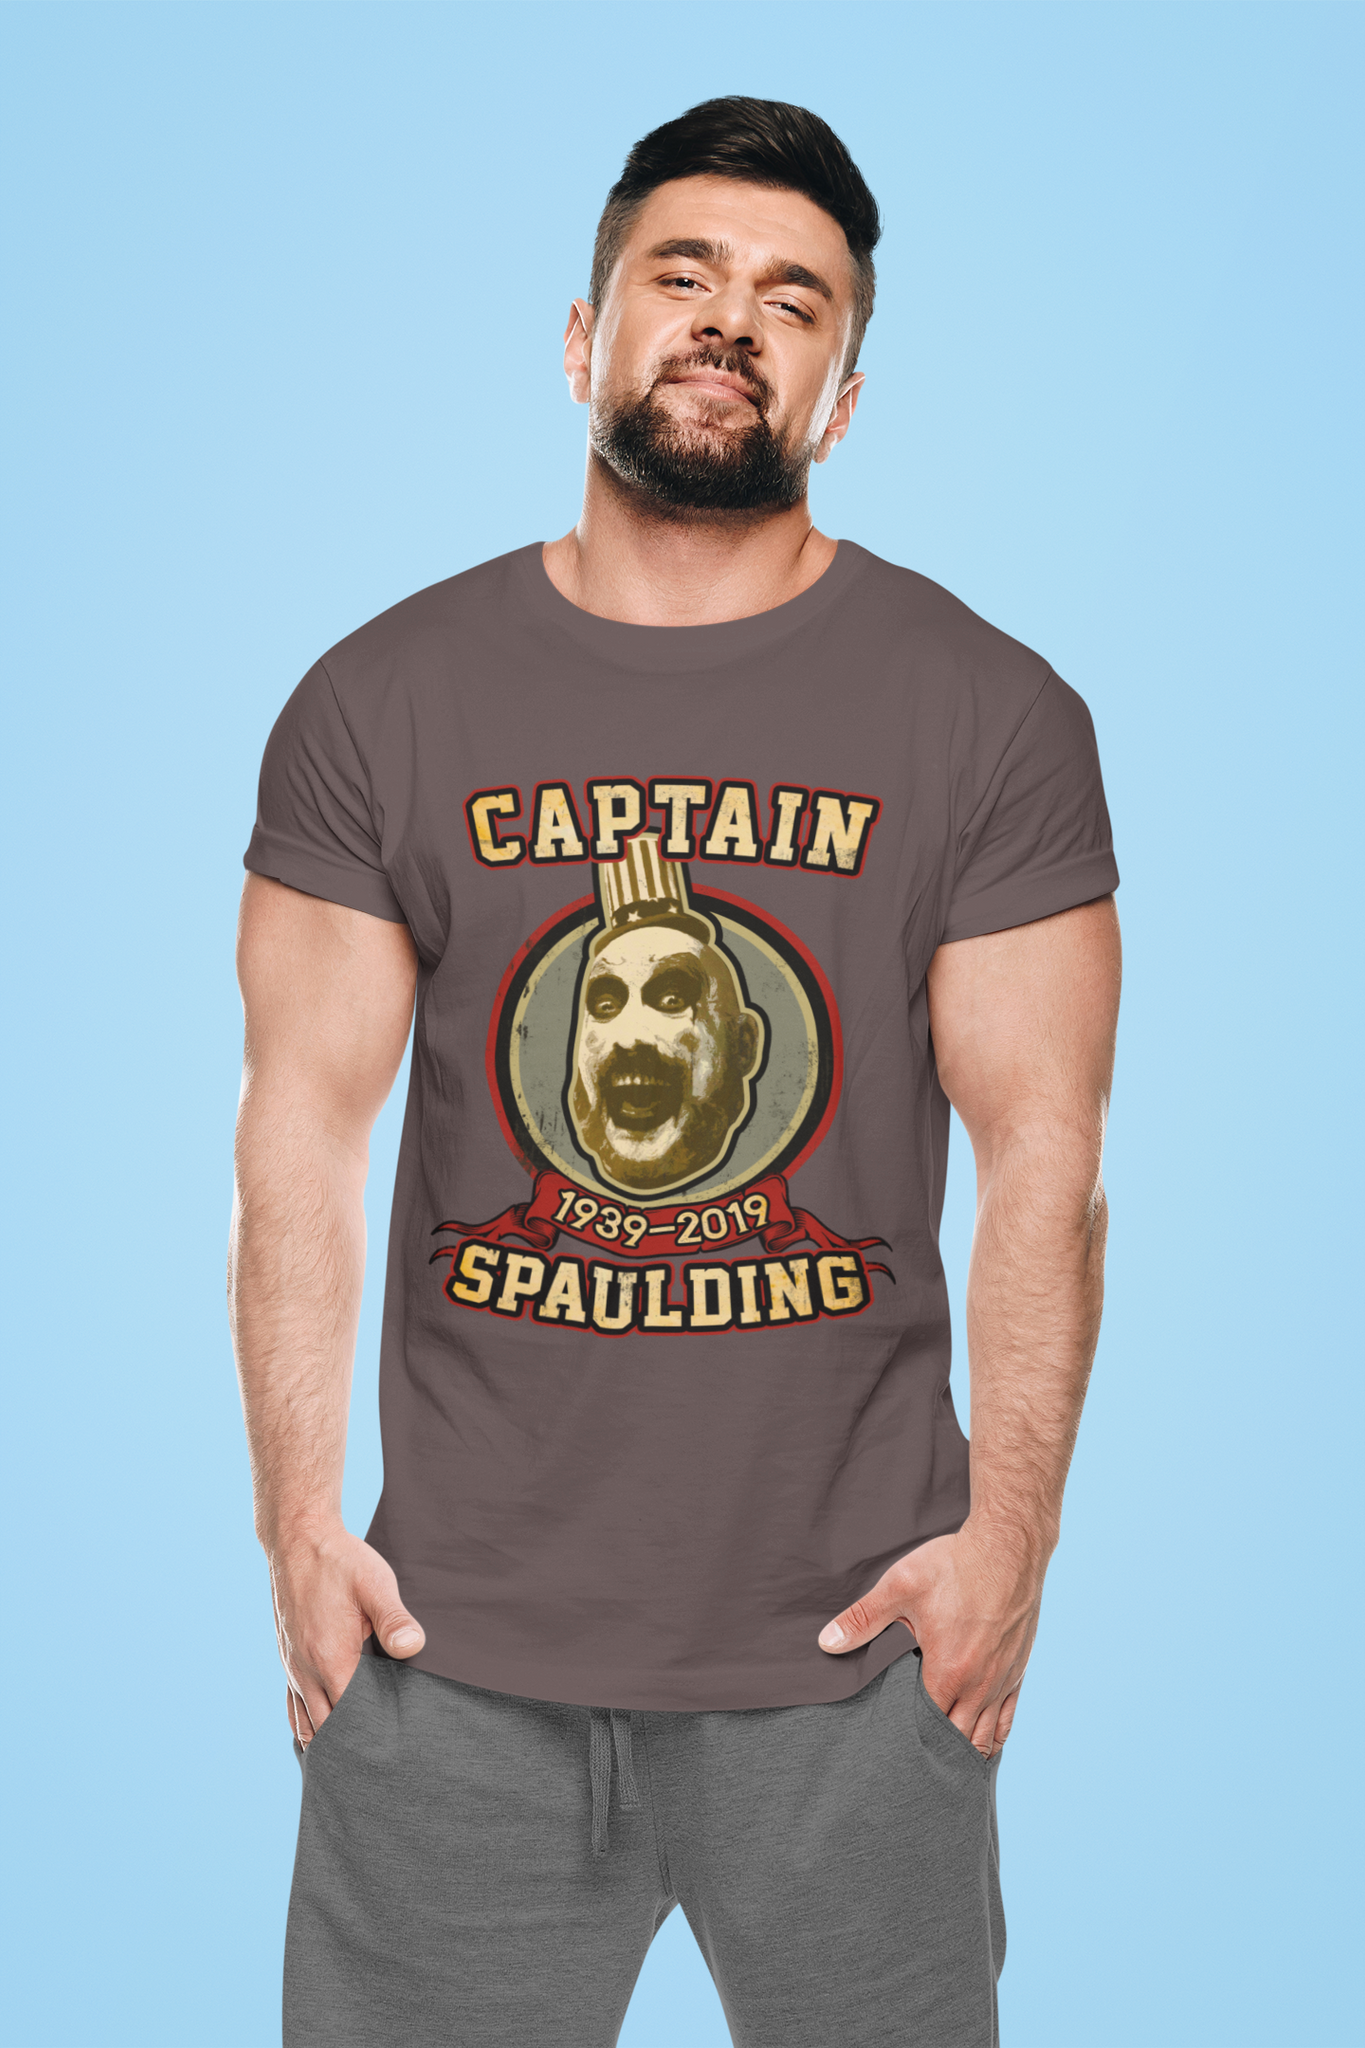 House Of 1000 Corpses T Shirt, Captain Spaulding 1939 2019 Tshirt, Halloween Gifts